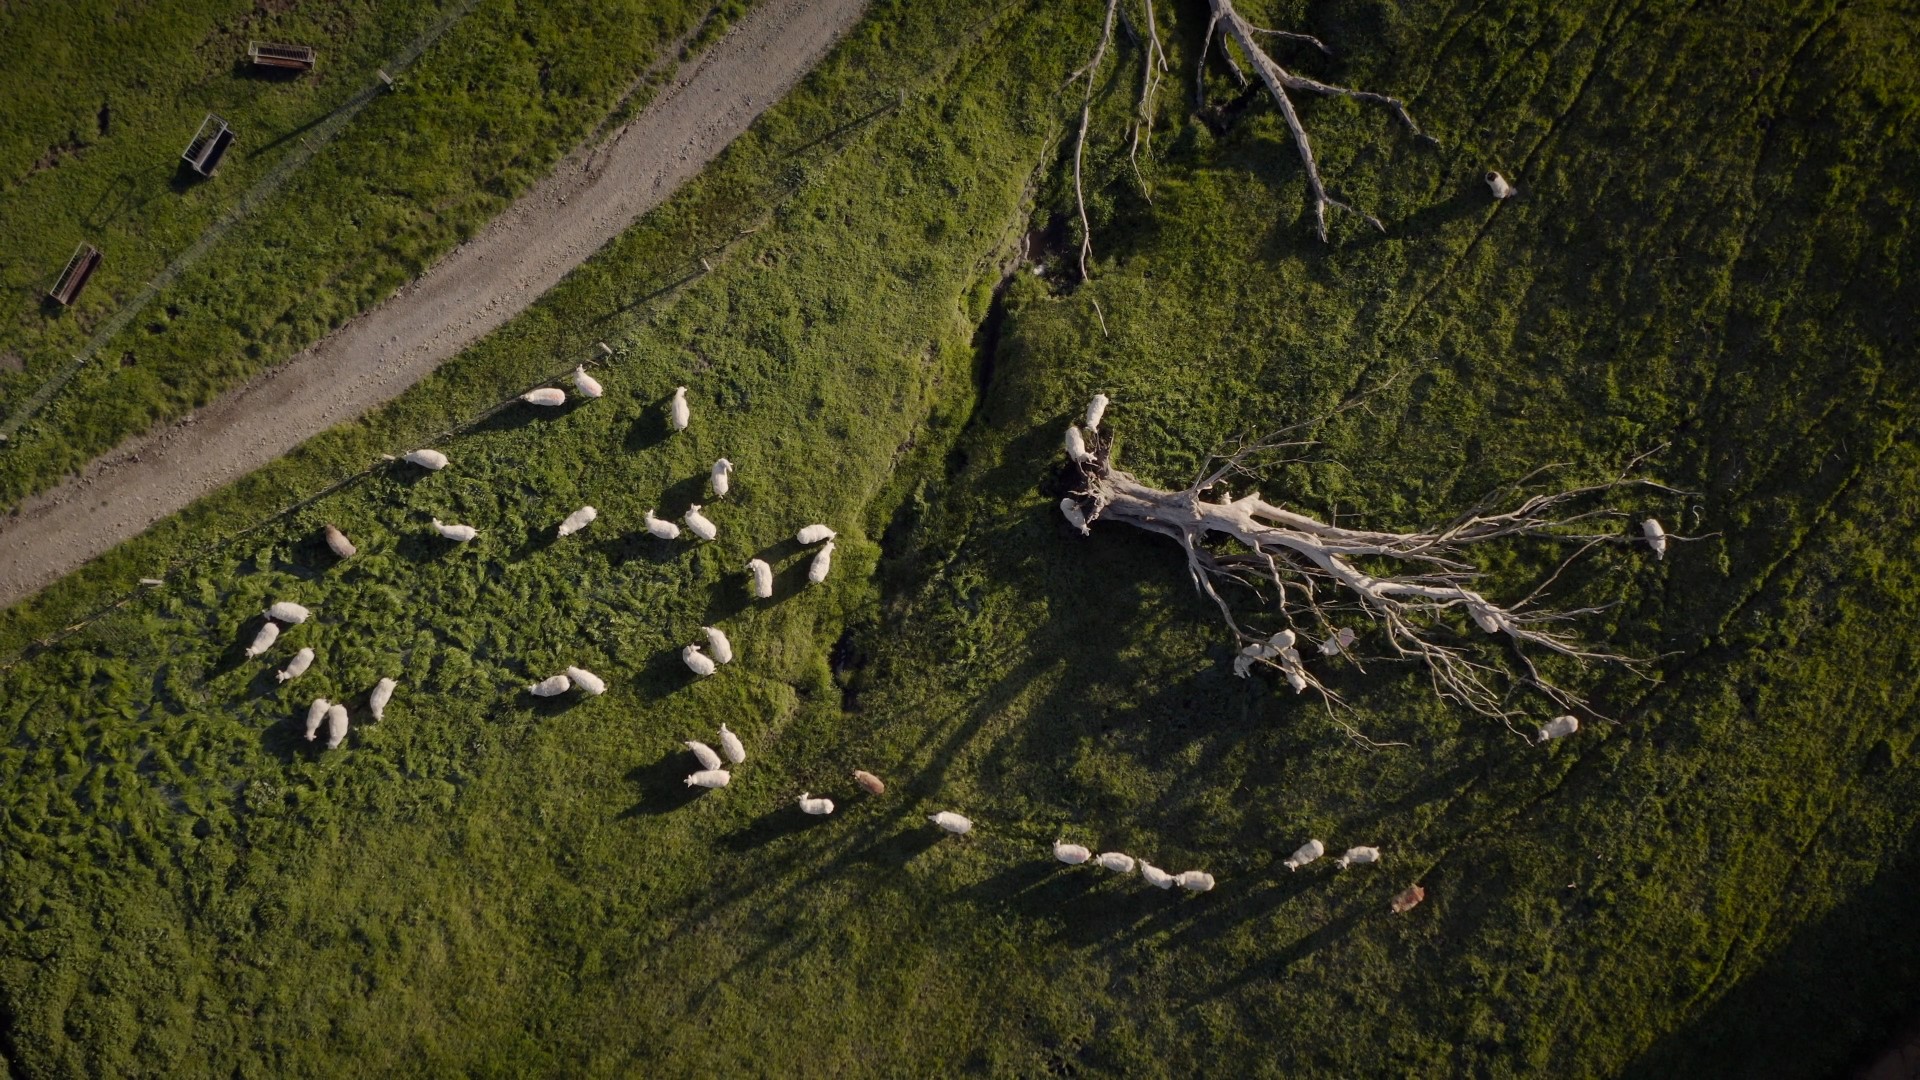 An aerial view of a herd of sheep on a grassy hill.